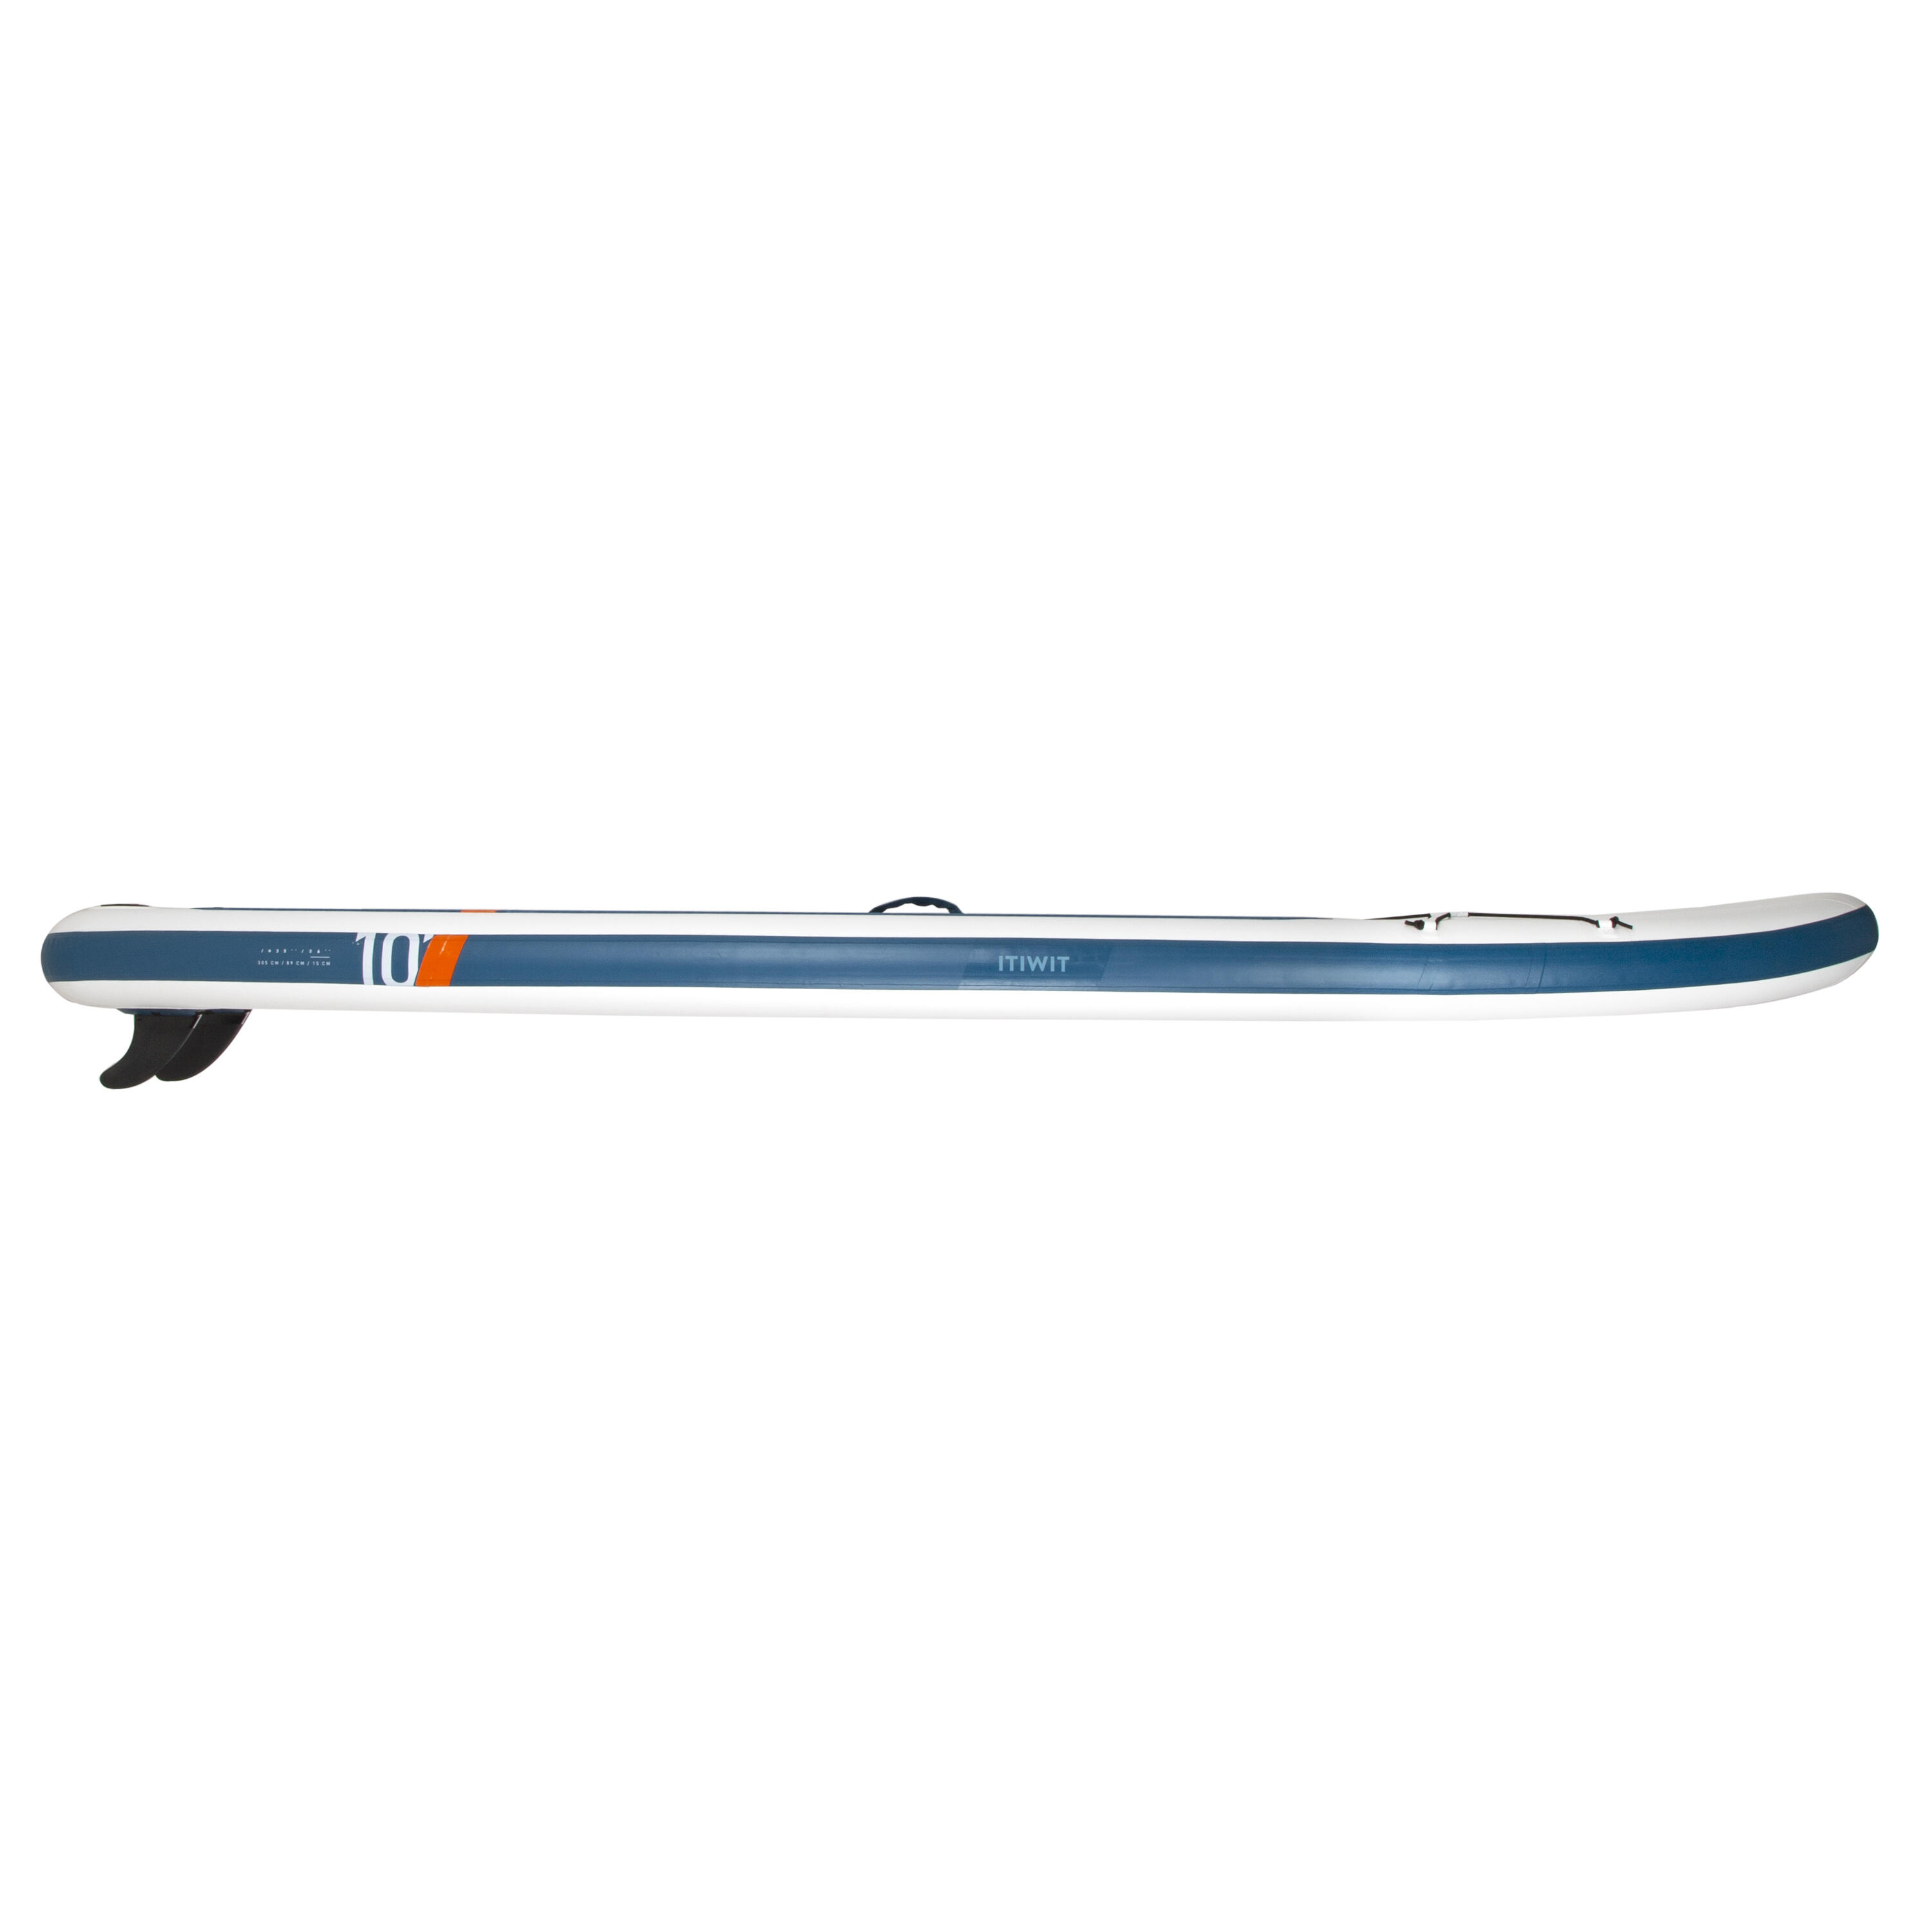 Ultra-compact and stable 10-foot (max. 130 kg) SUP - white and blue 4/29